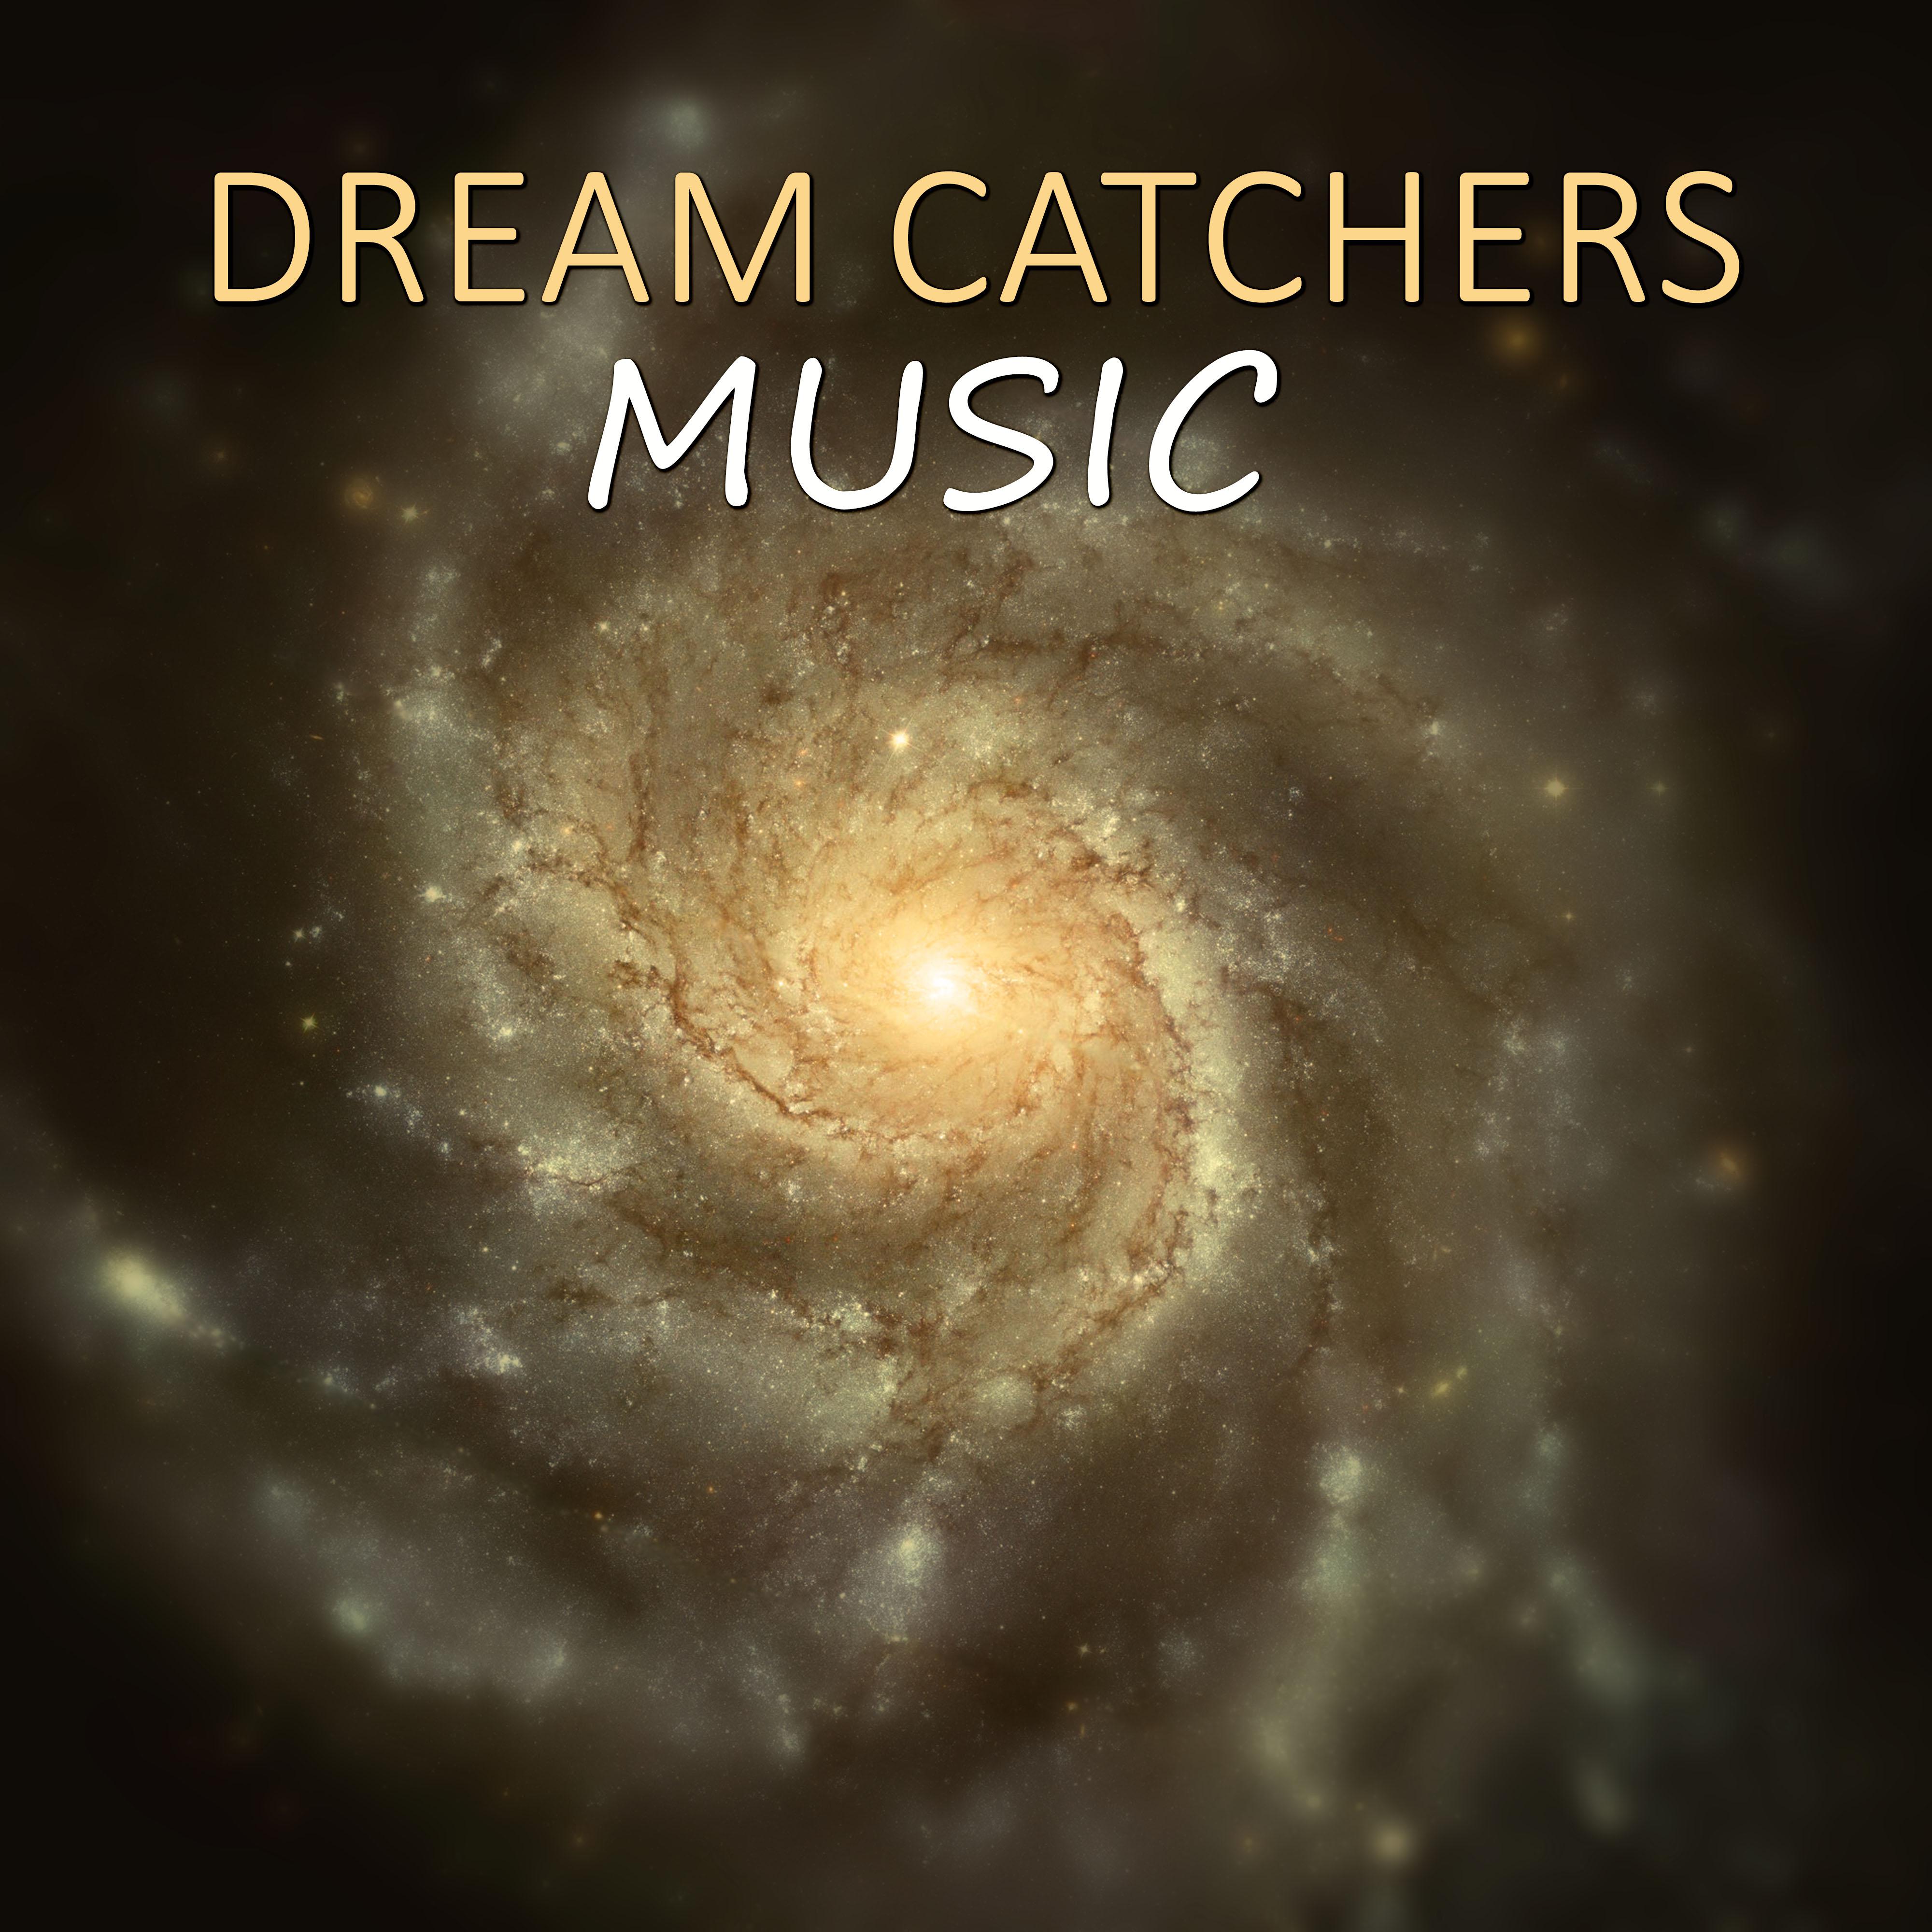 Dream Catchers Music  Best Sounds of Nature to Sleep  Meditation, Bedtime Music to Help You Relax, Recoup Positive Energy and Feel Better